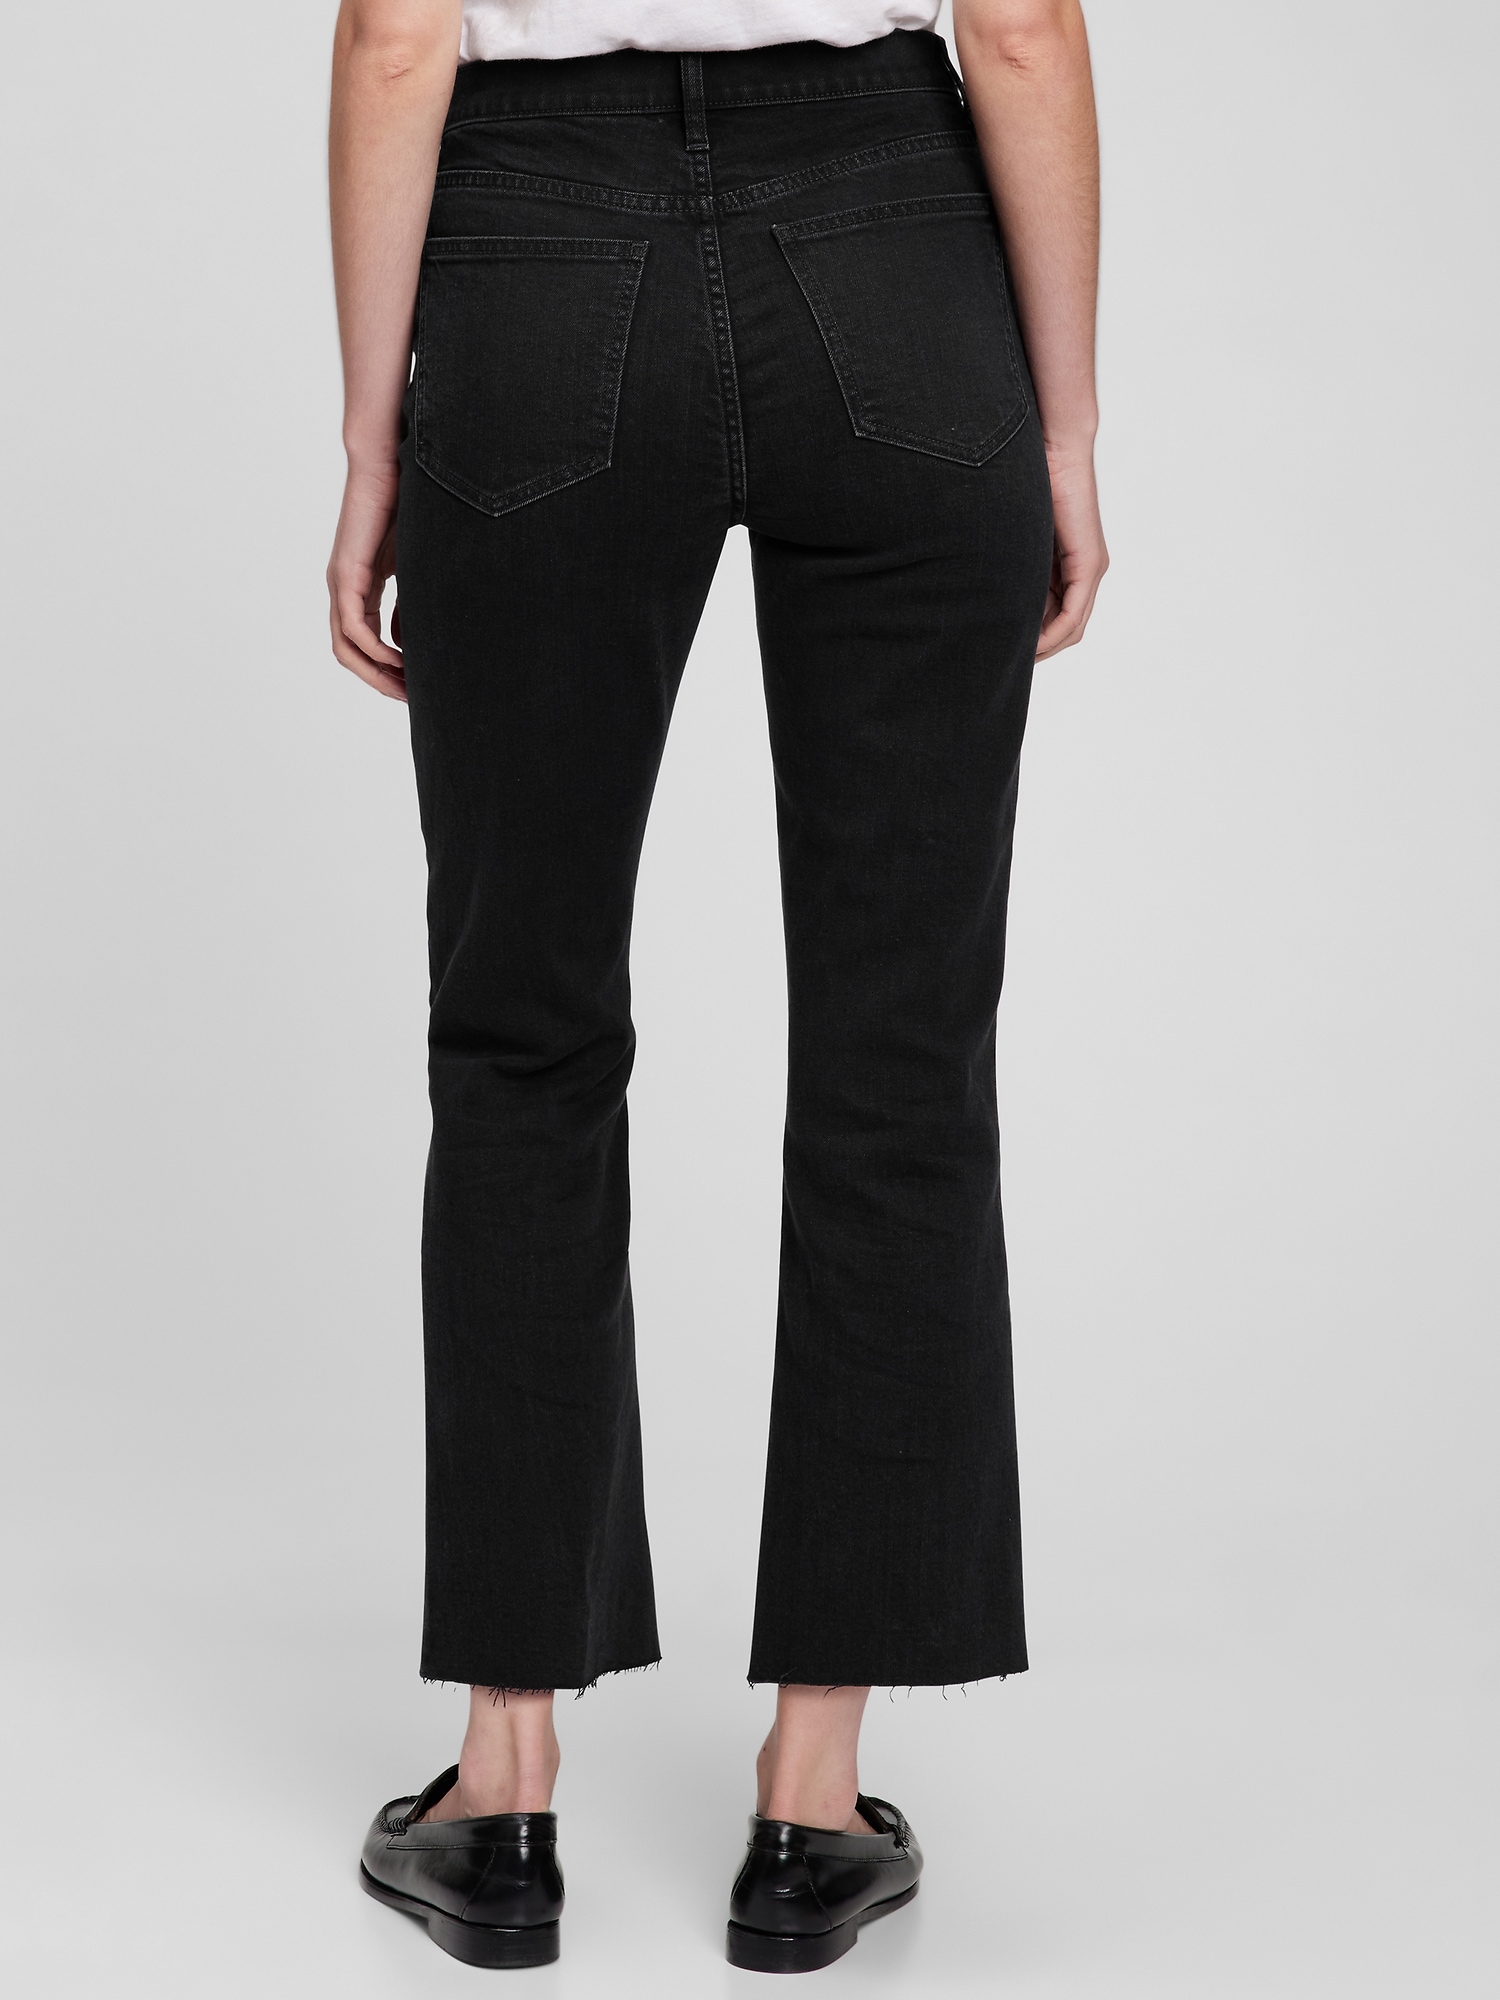 Essential Black Jeans: Gap High Rise Flare Jeans